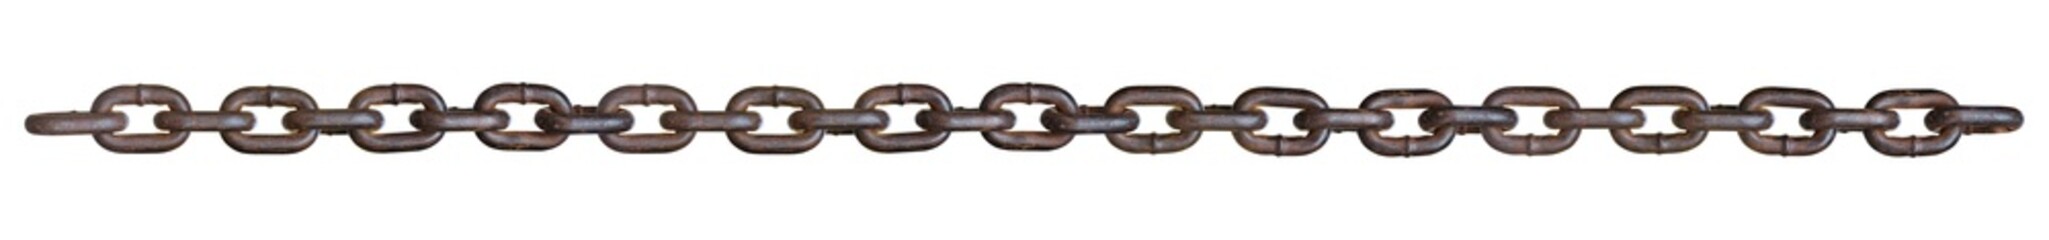 chain isolated on white background. clipping path included.